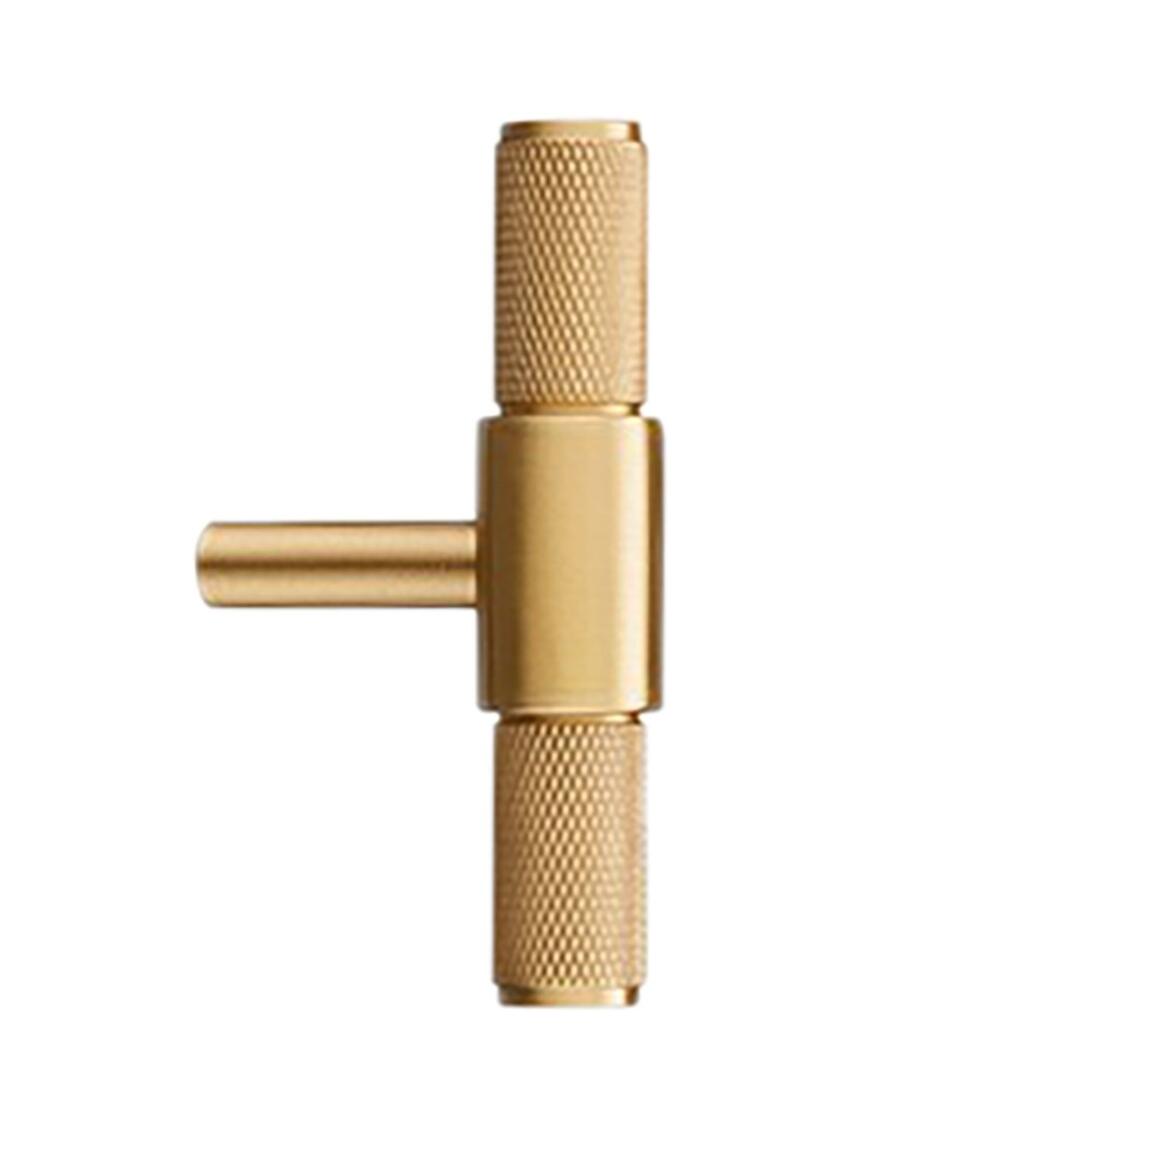 Samford Small Brass Knurled Pull Handle main product image